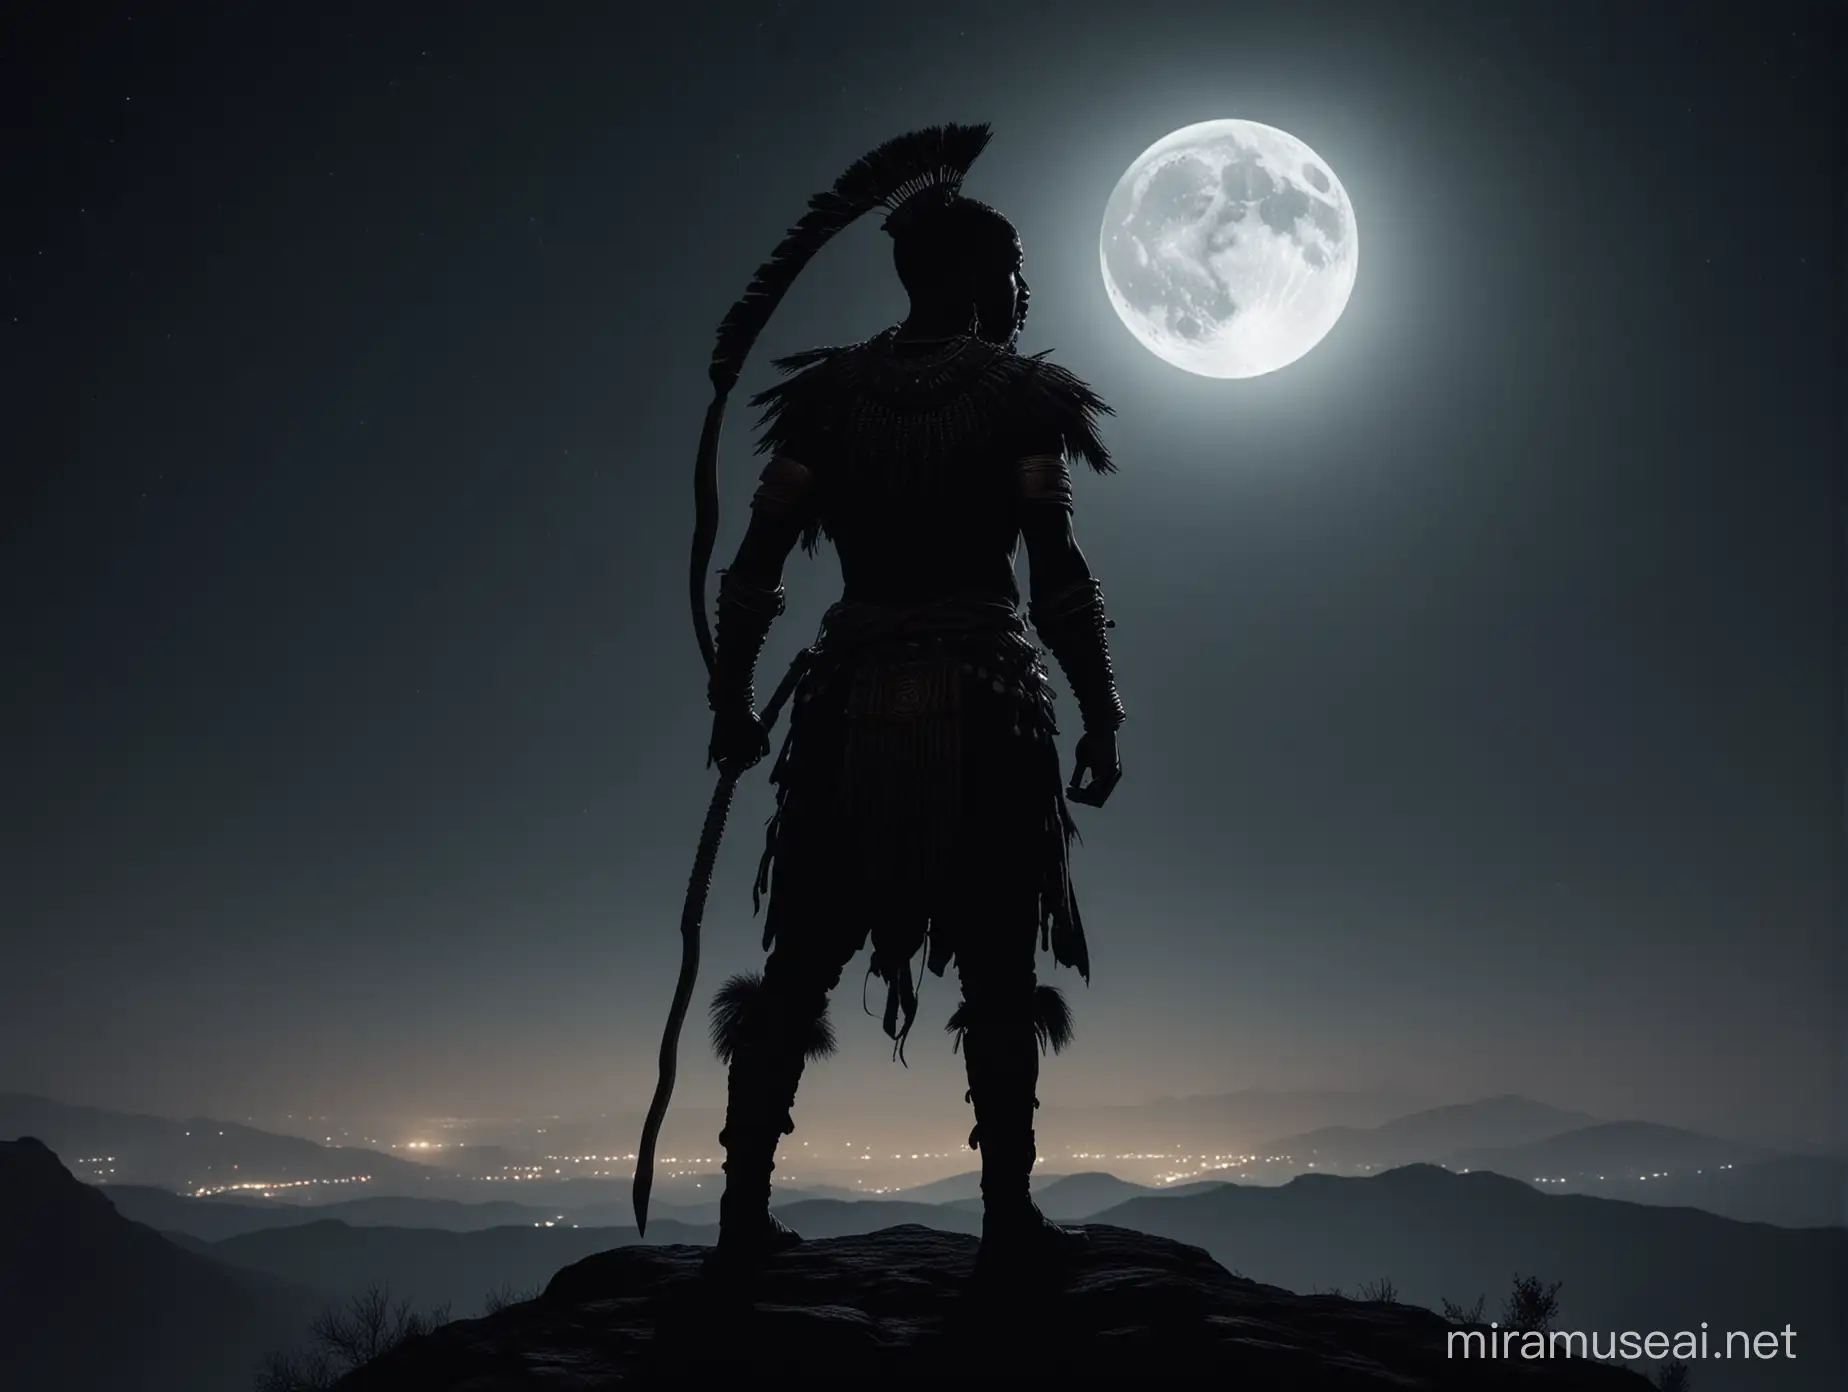 African Warrior Silhouetted Against Moonlit Mountain Edge